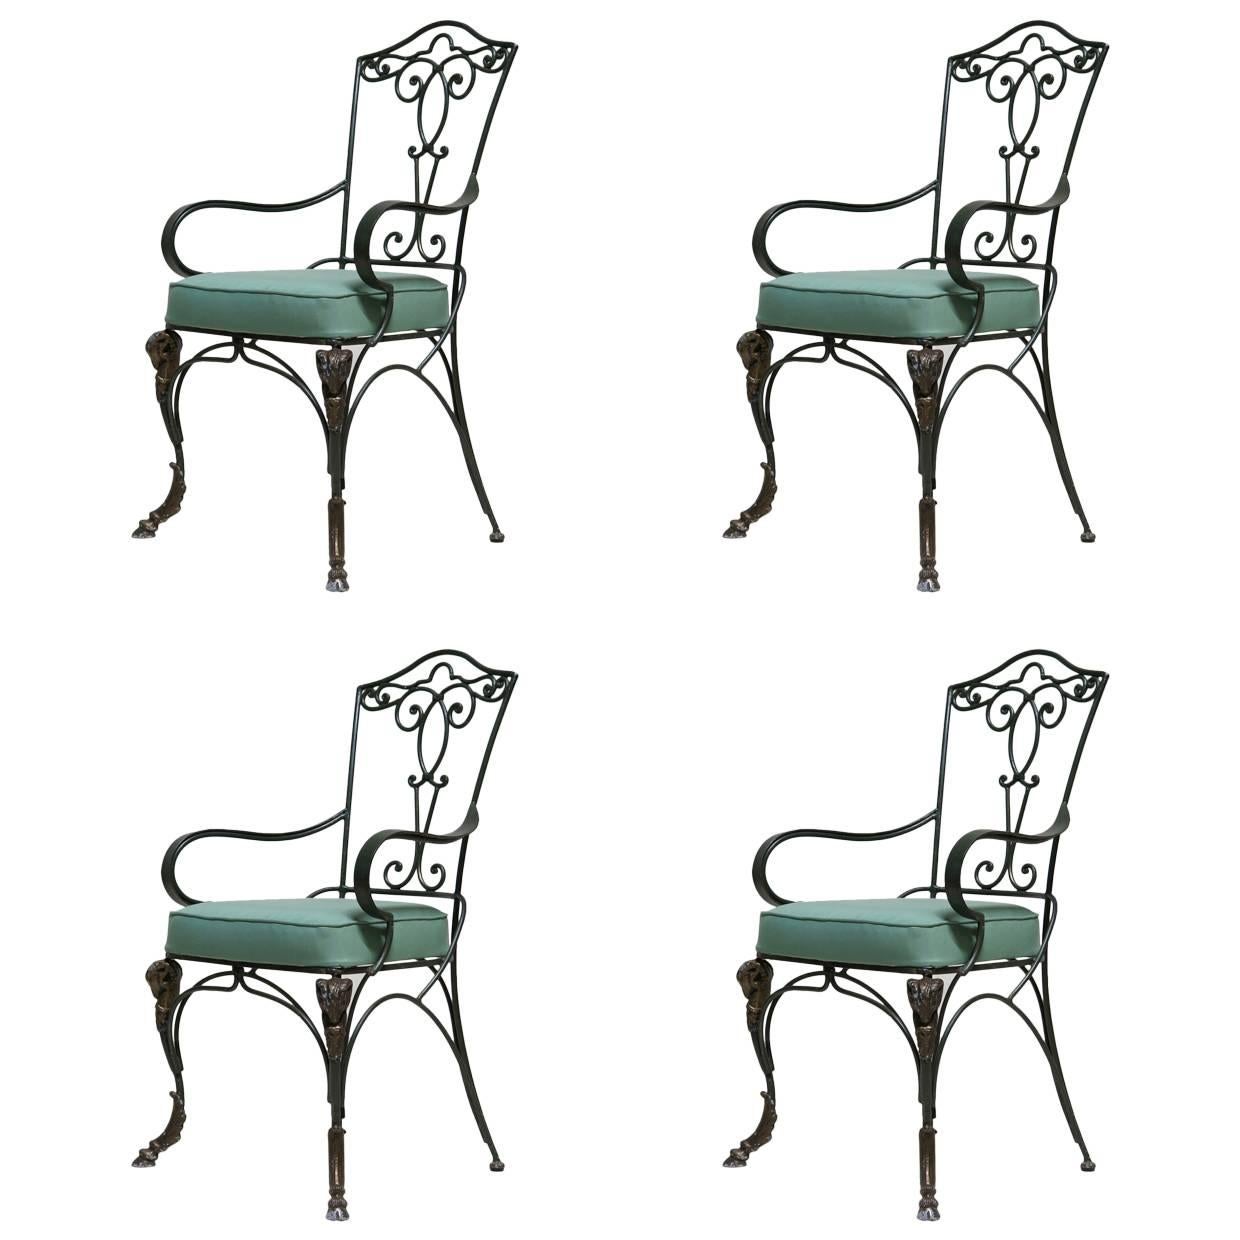 Set of Four Ram-Head Motif Chairs, France, 1940s Style